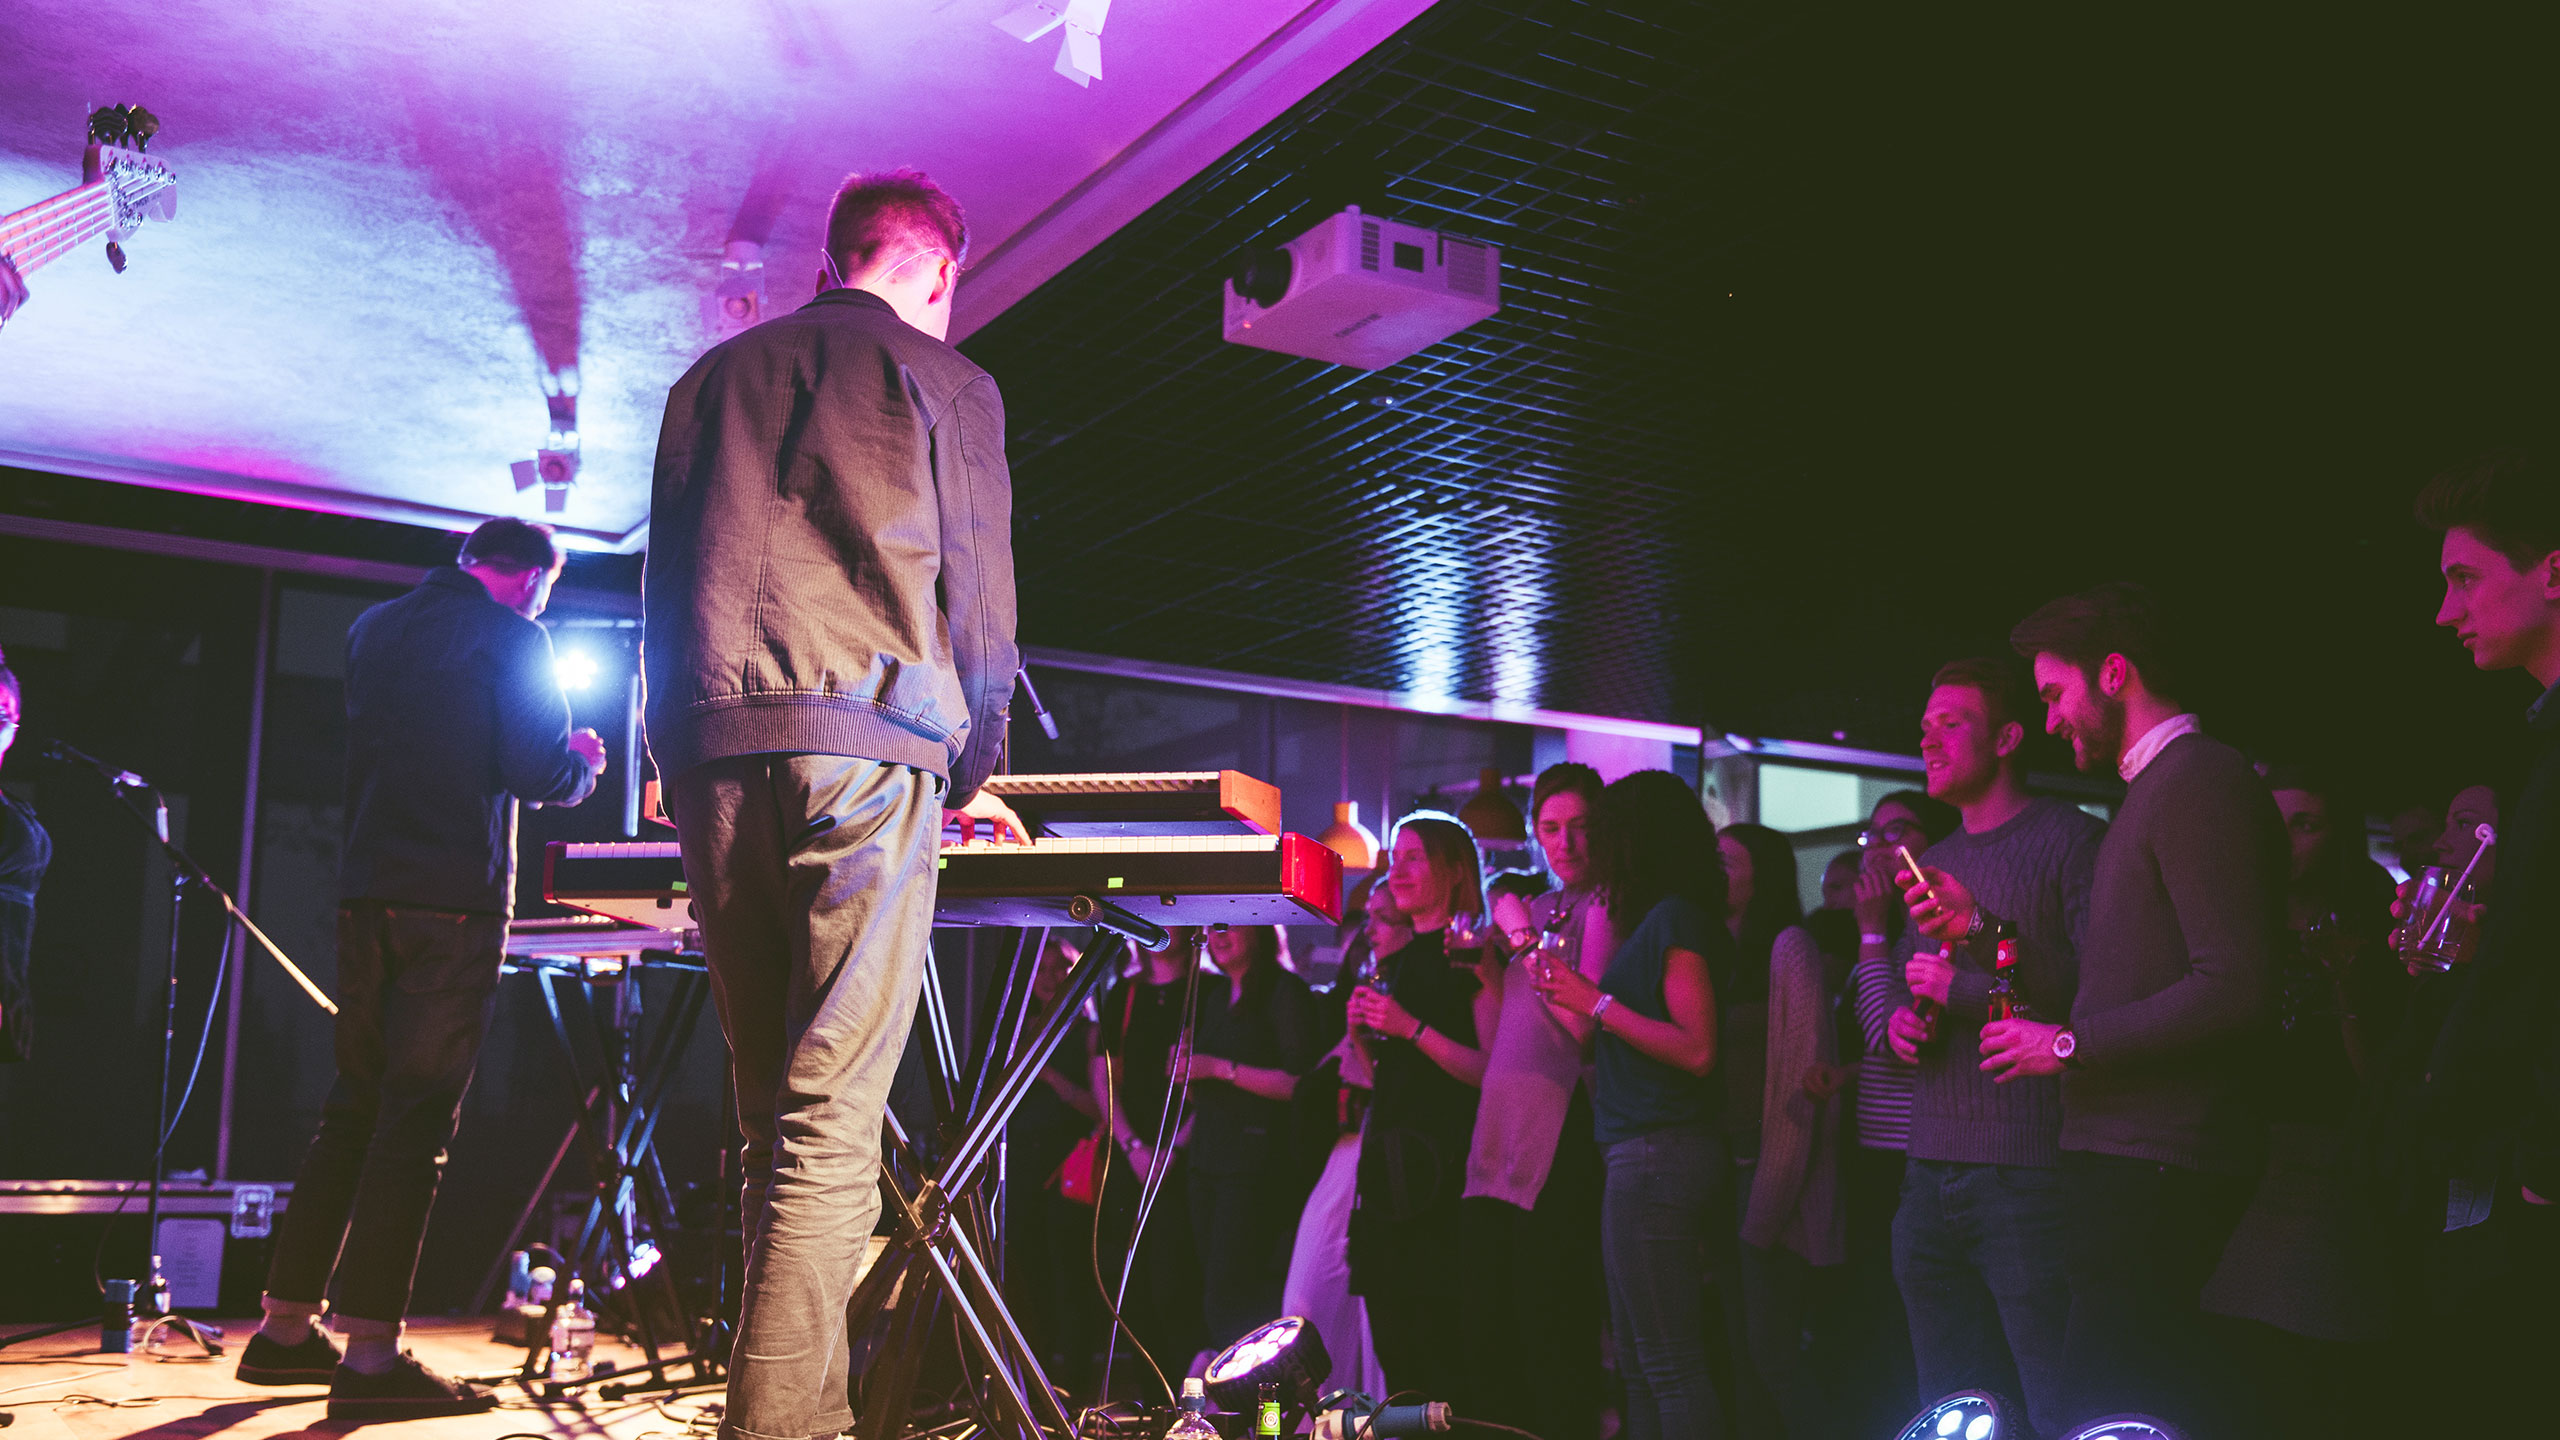 A shot from behind Honne performing keyboards and singing on stage at PRS Presents, the audience are chatting